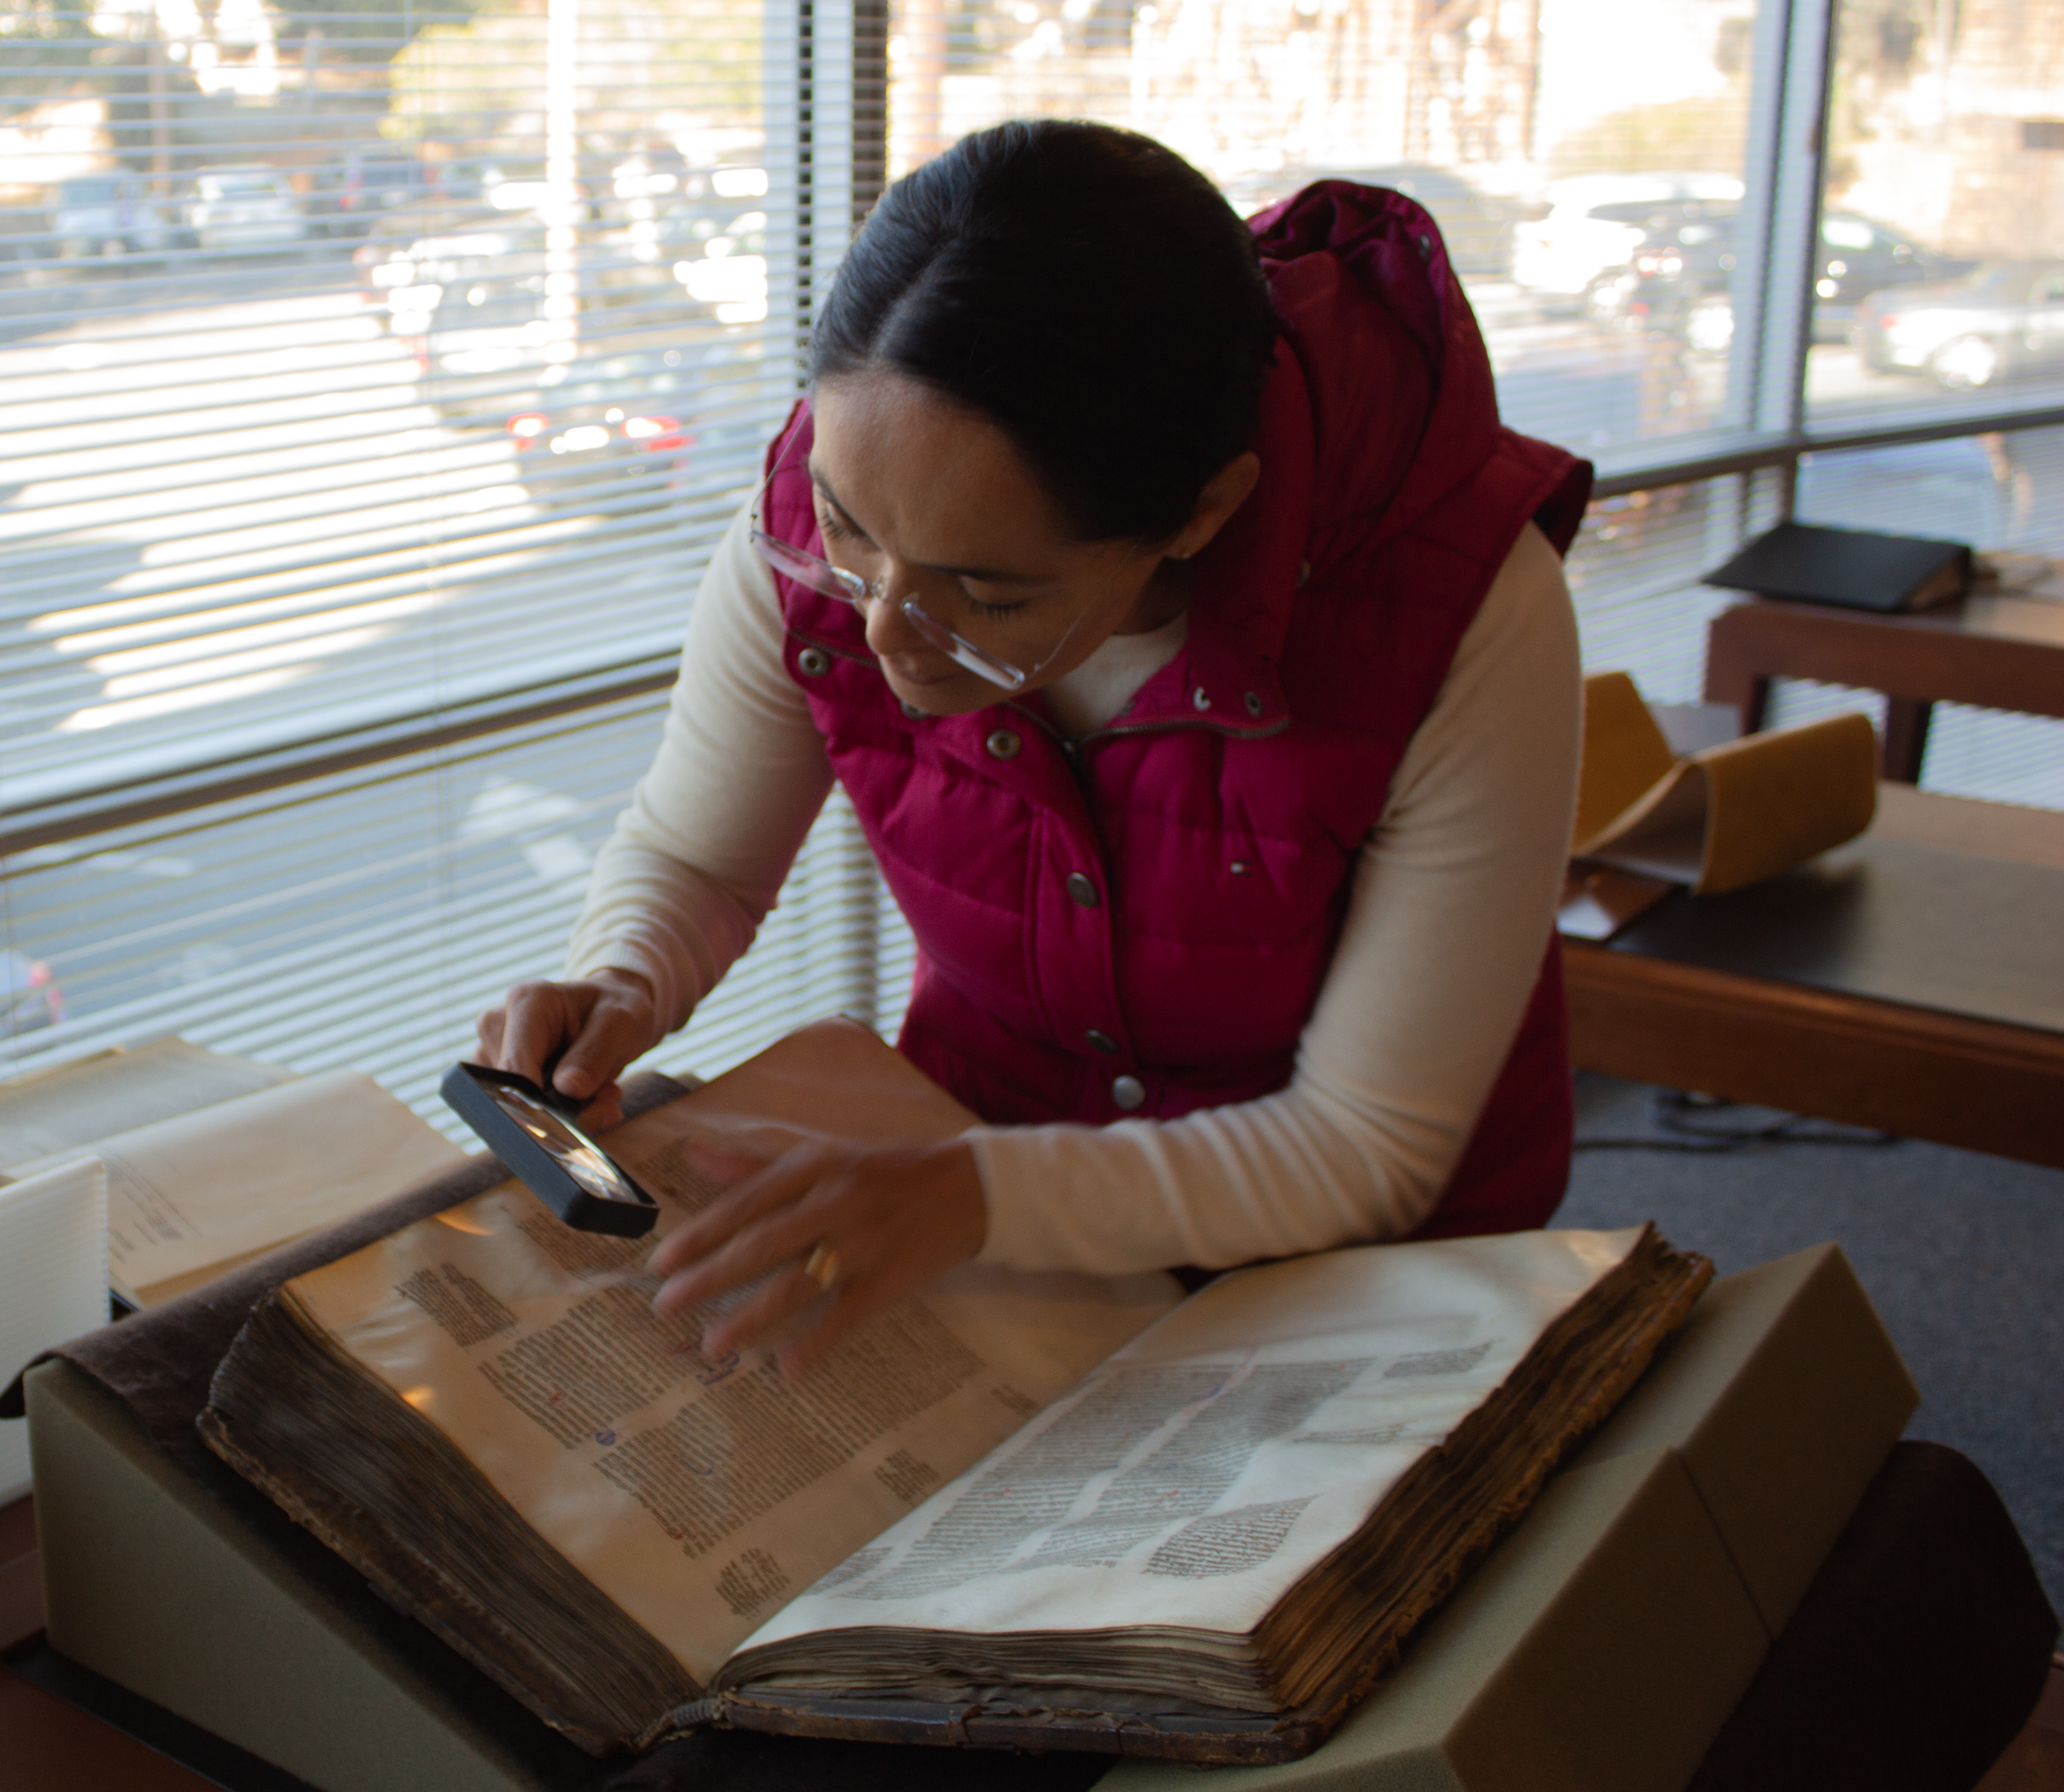 Photograph of Laura Velázquez Arroyo using a magnifying glass to look at a manuscript